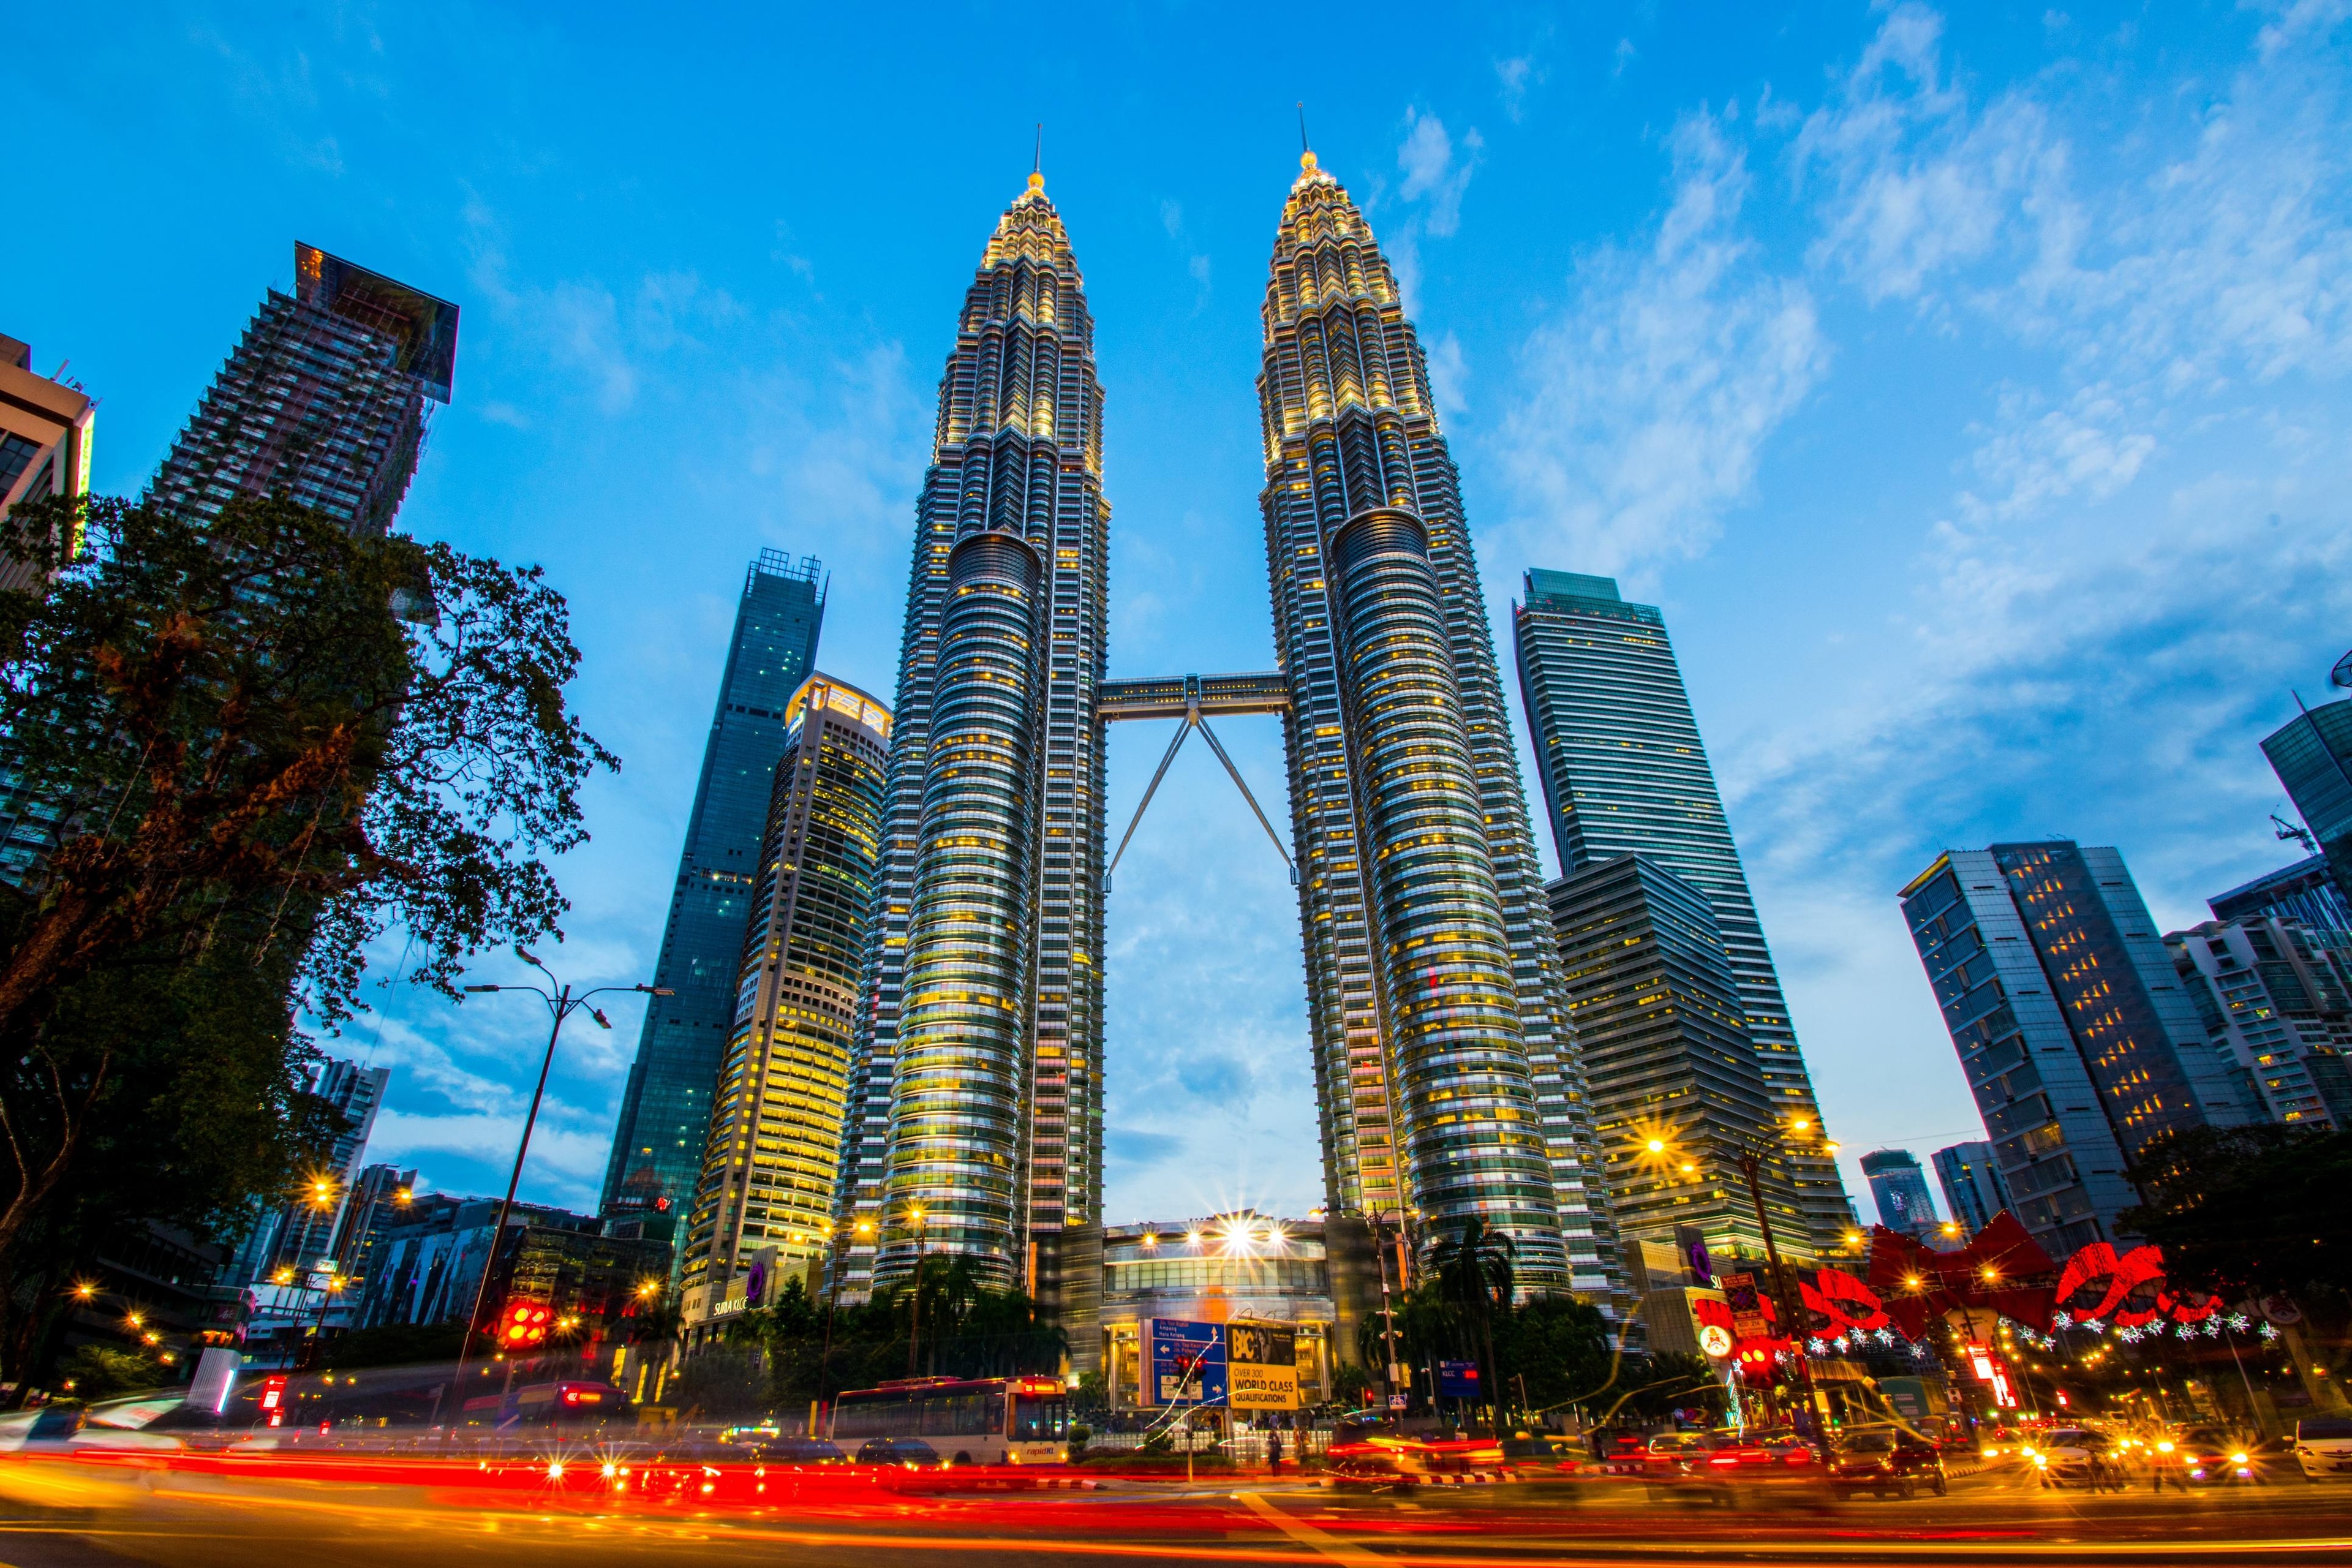 Petronas Twin Tower Malaysia: Timing, Location and Things to Do